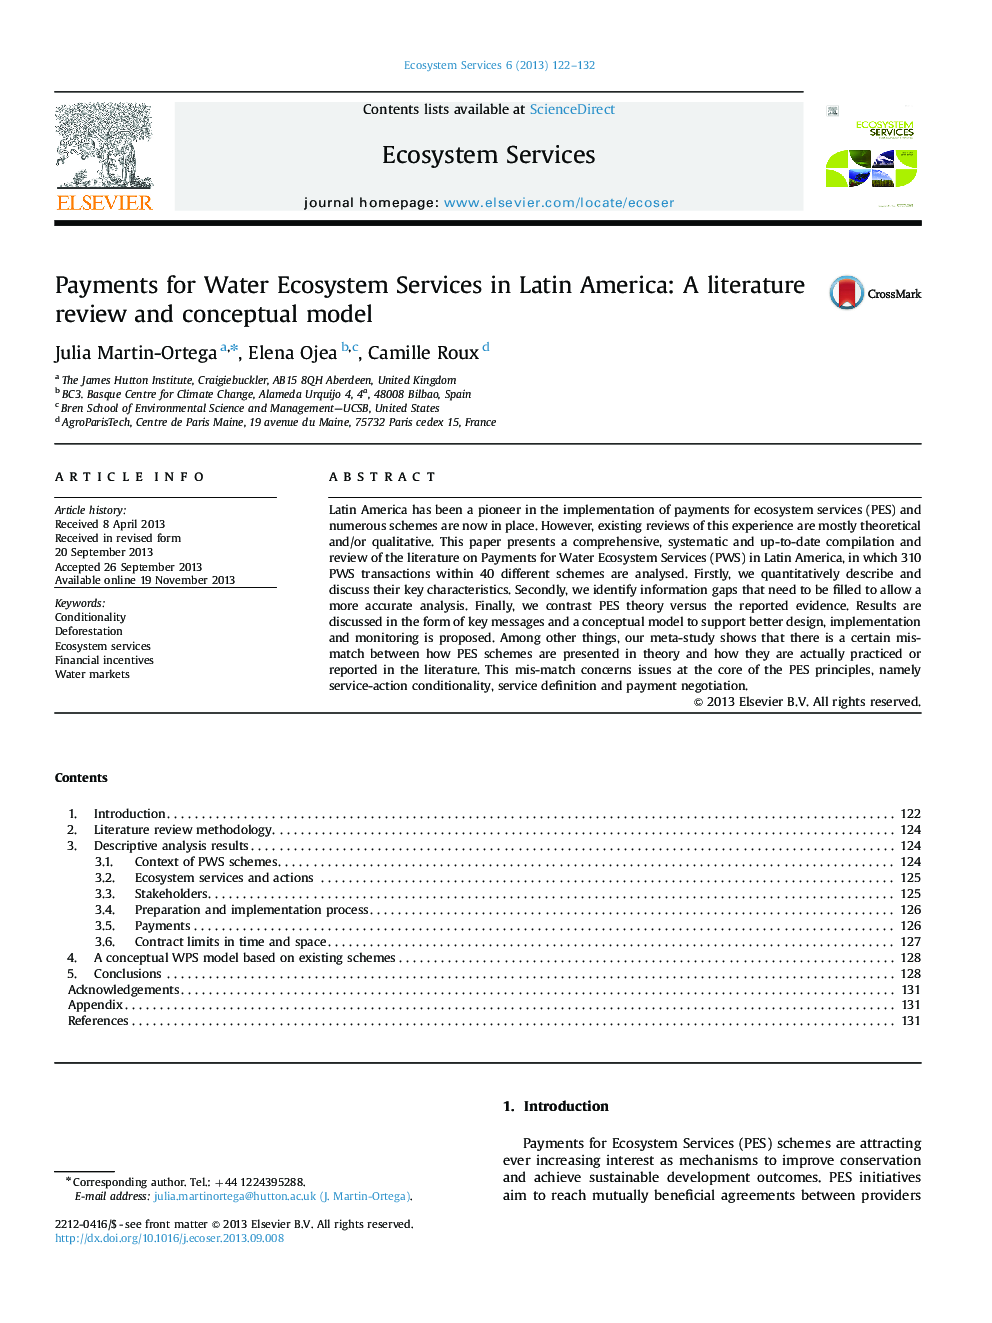 Payments for Water Ecosystem Services in Latin America: A literature review and conceptual model